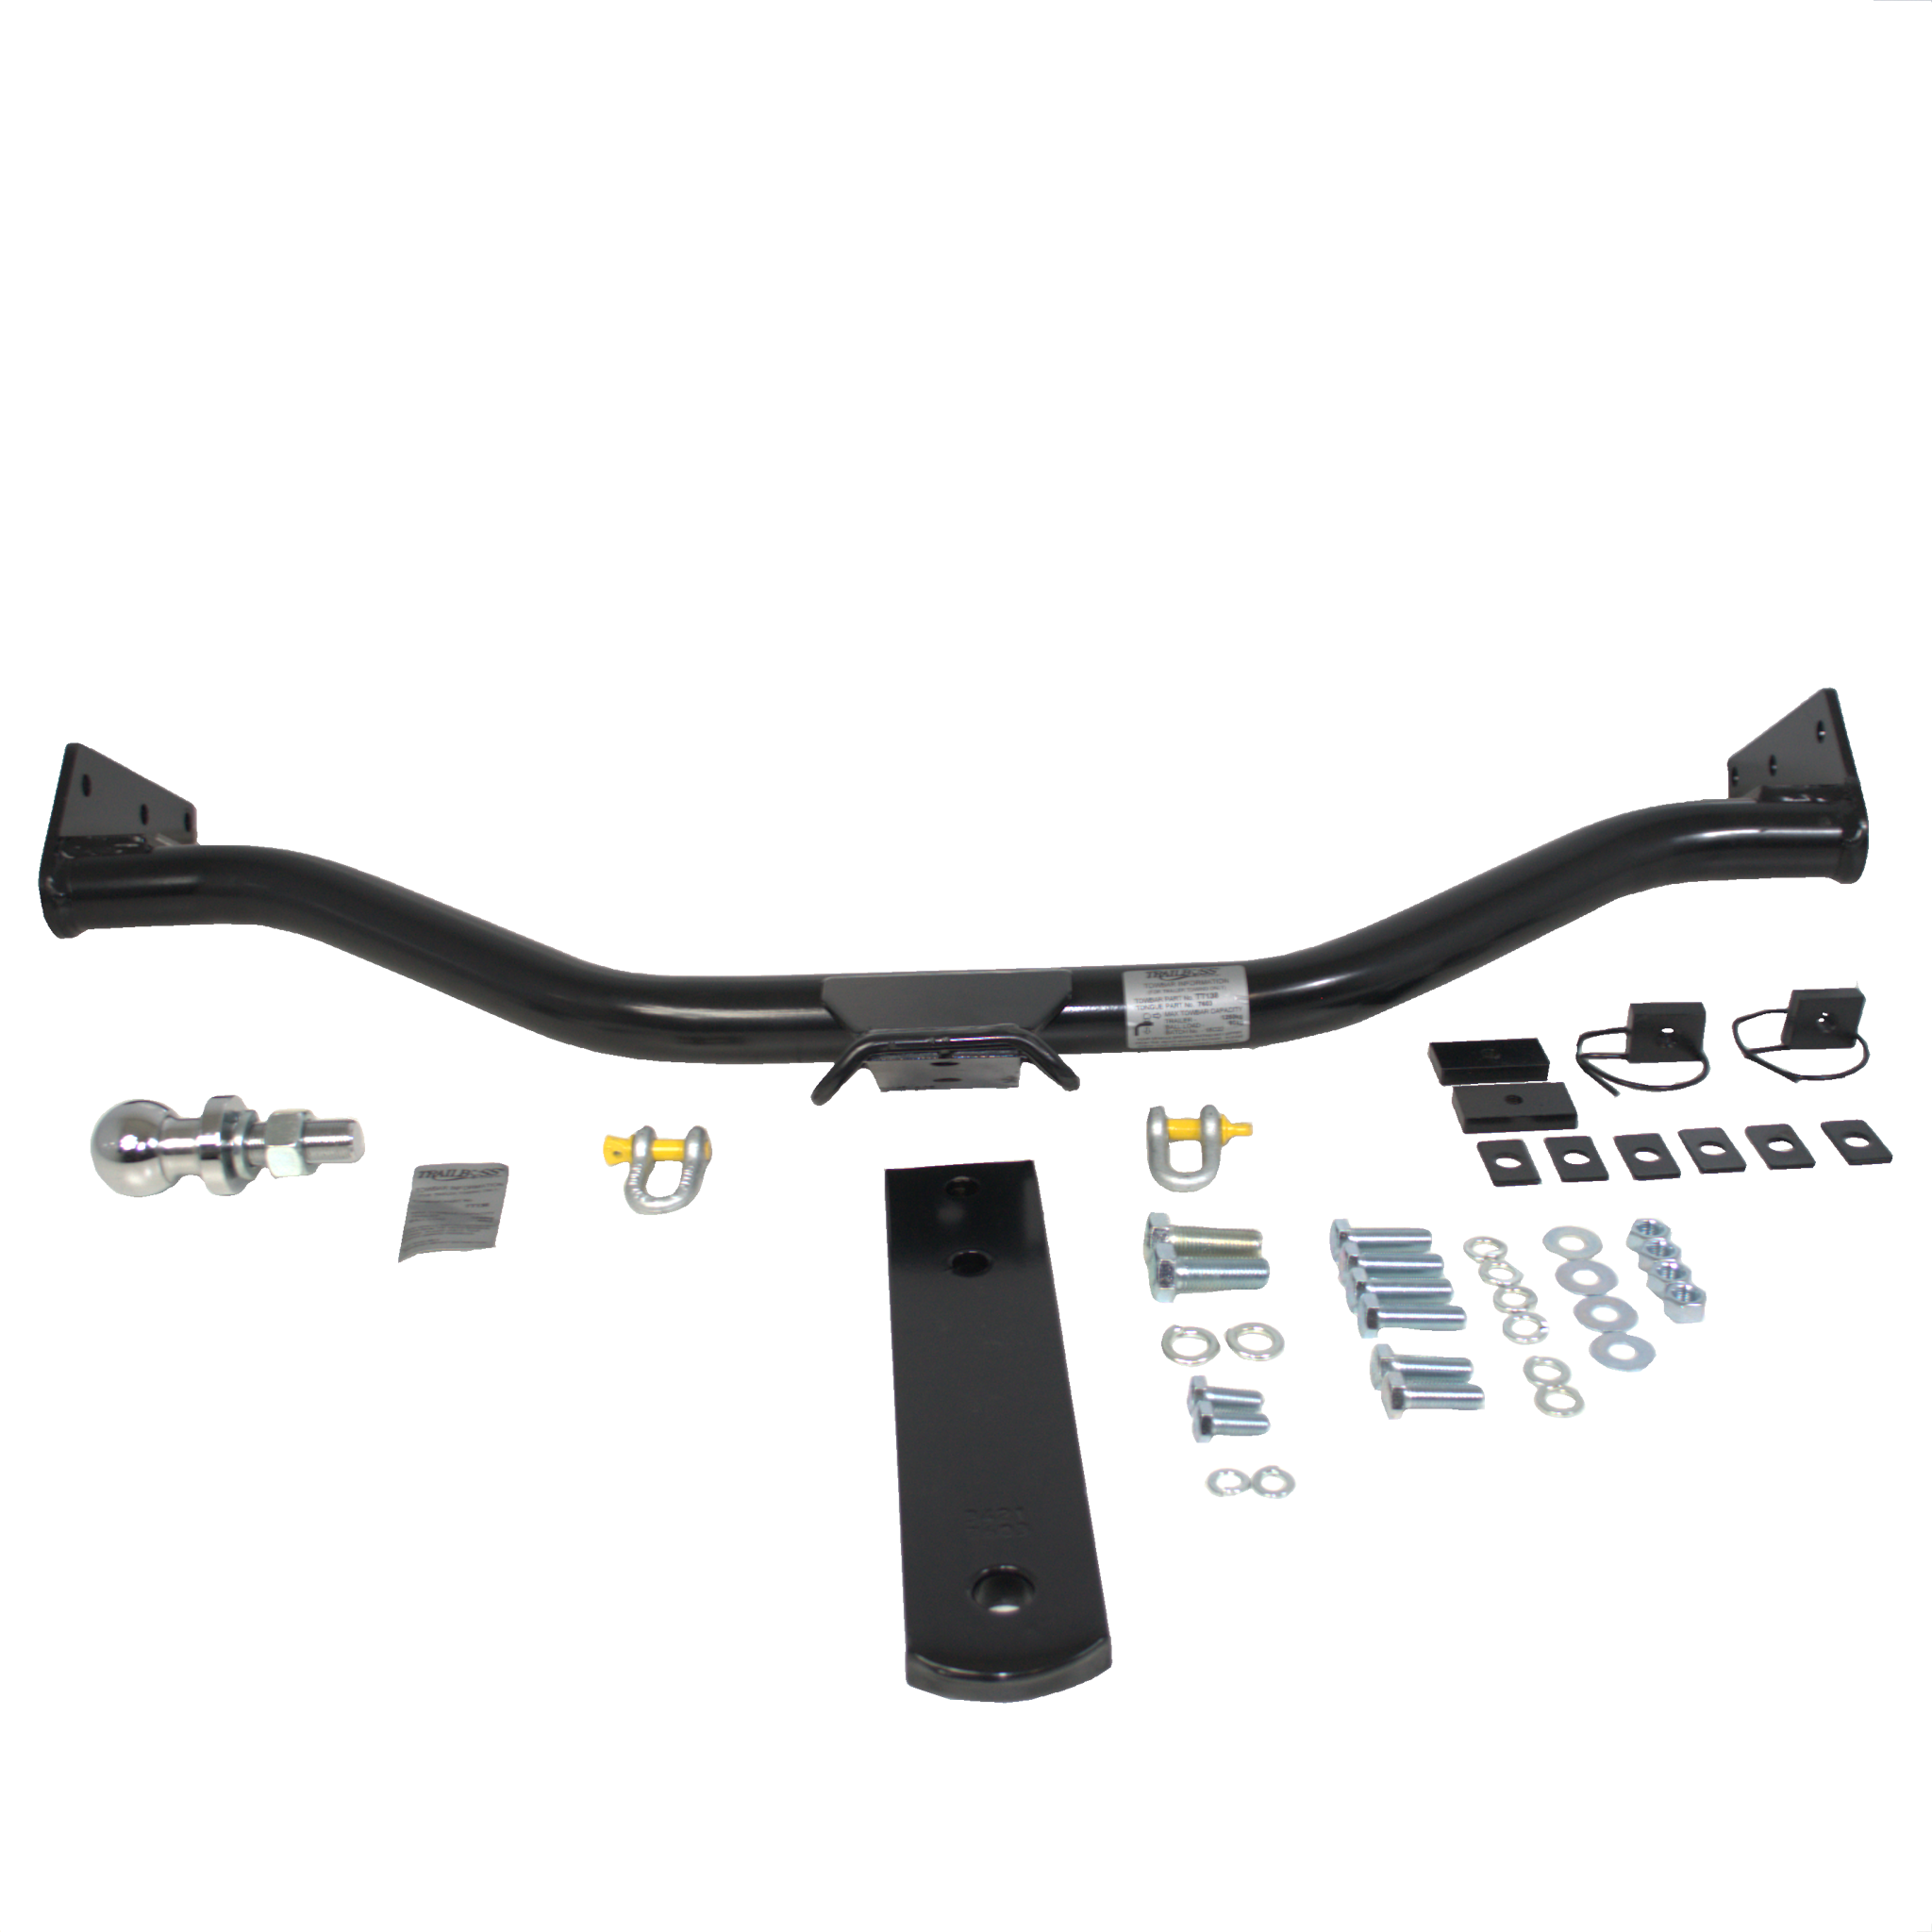 Toyota HiLux 2wd Cab Chassis Tub Body Without Bumper 10/1983 - 03/2005 - Towbar Kit - STANDARD DUTY